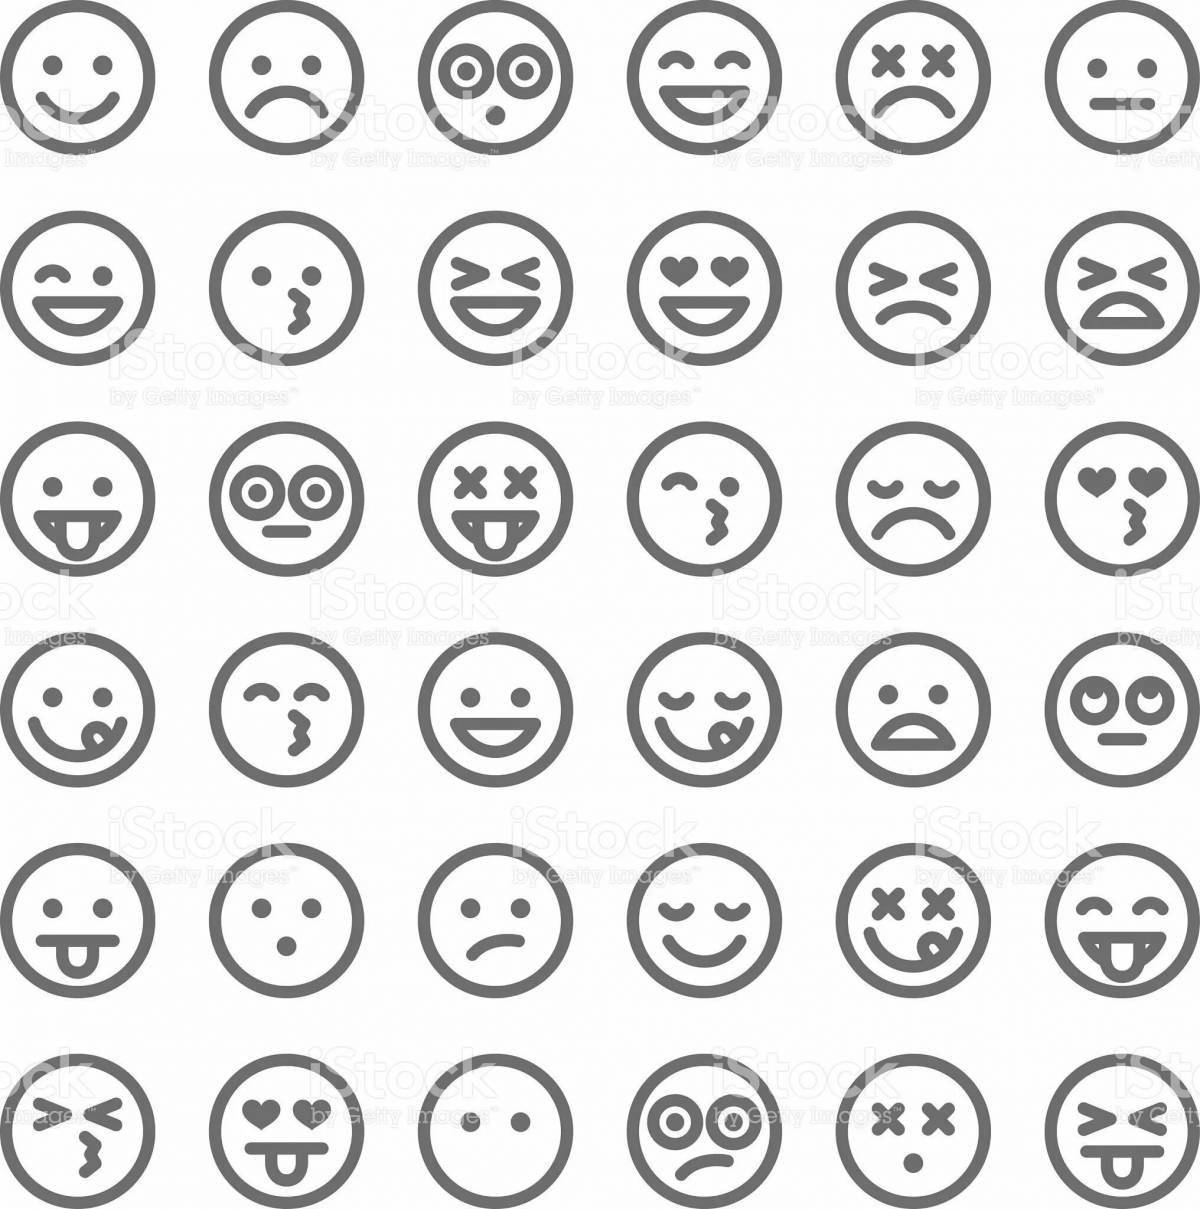 Adorable coloring book little emoticons for stickers